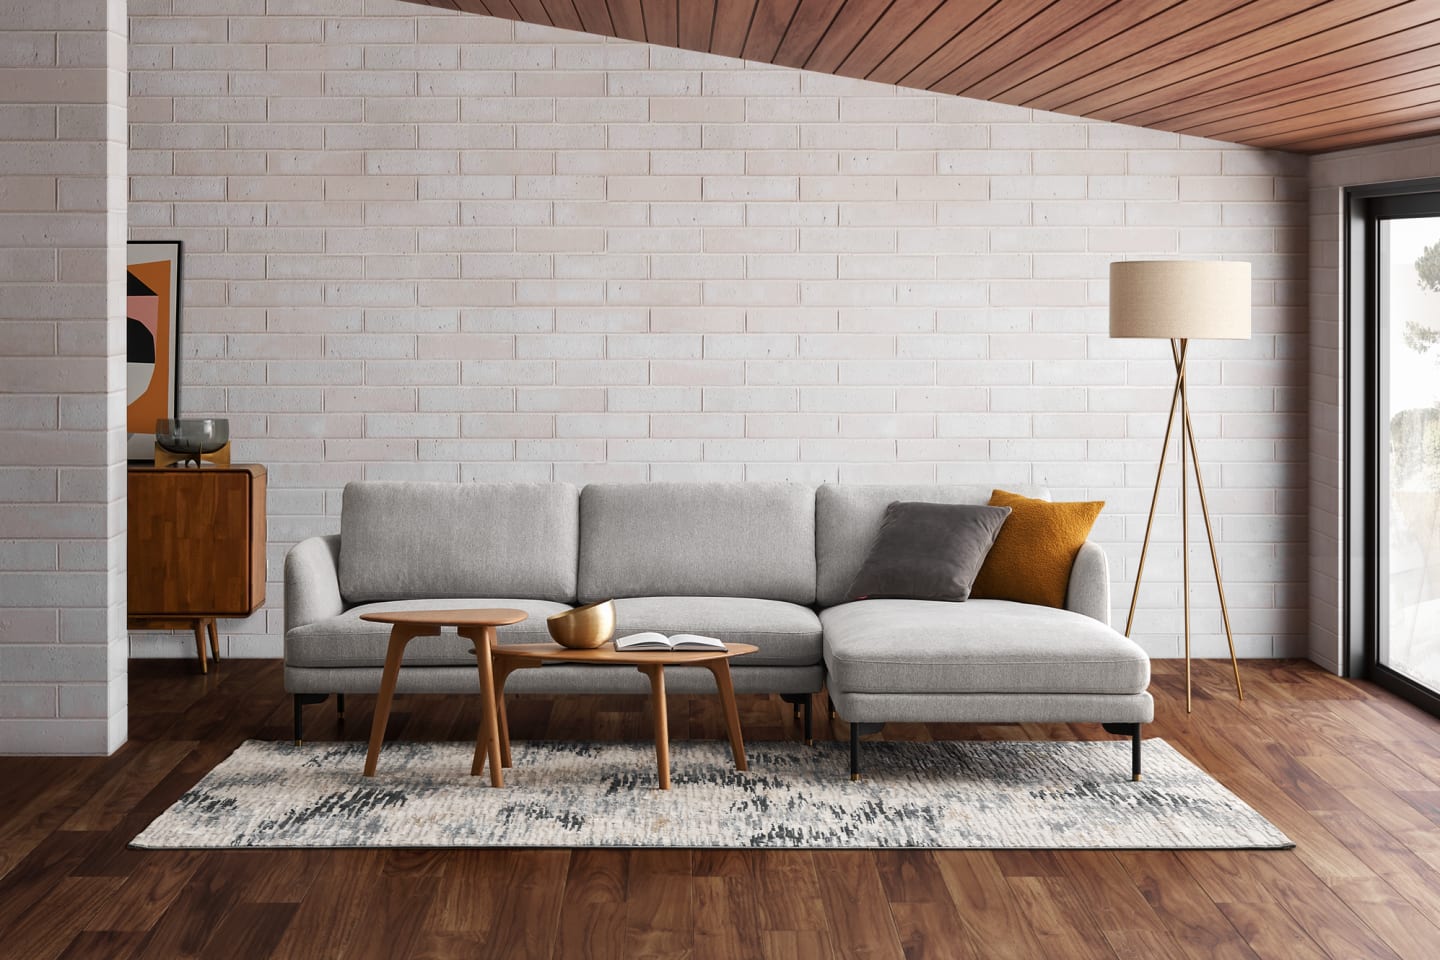 How to Choose the Right Color for a Living Space Sectional?